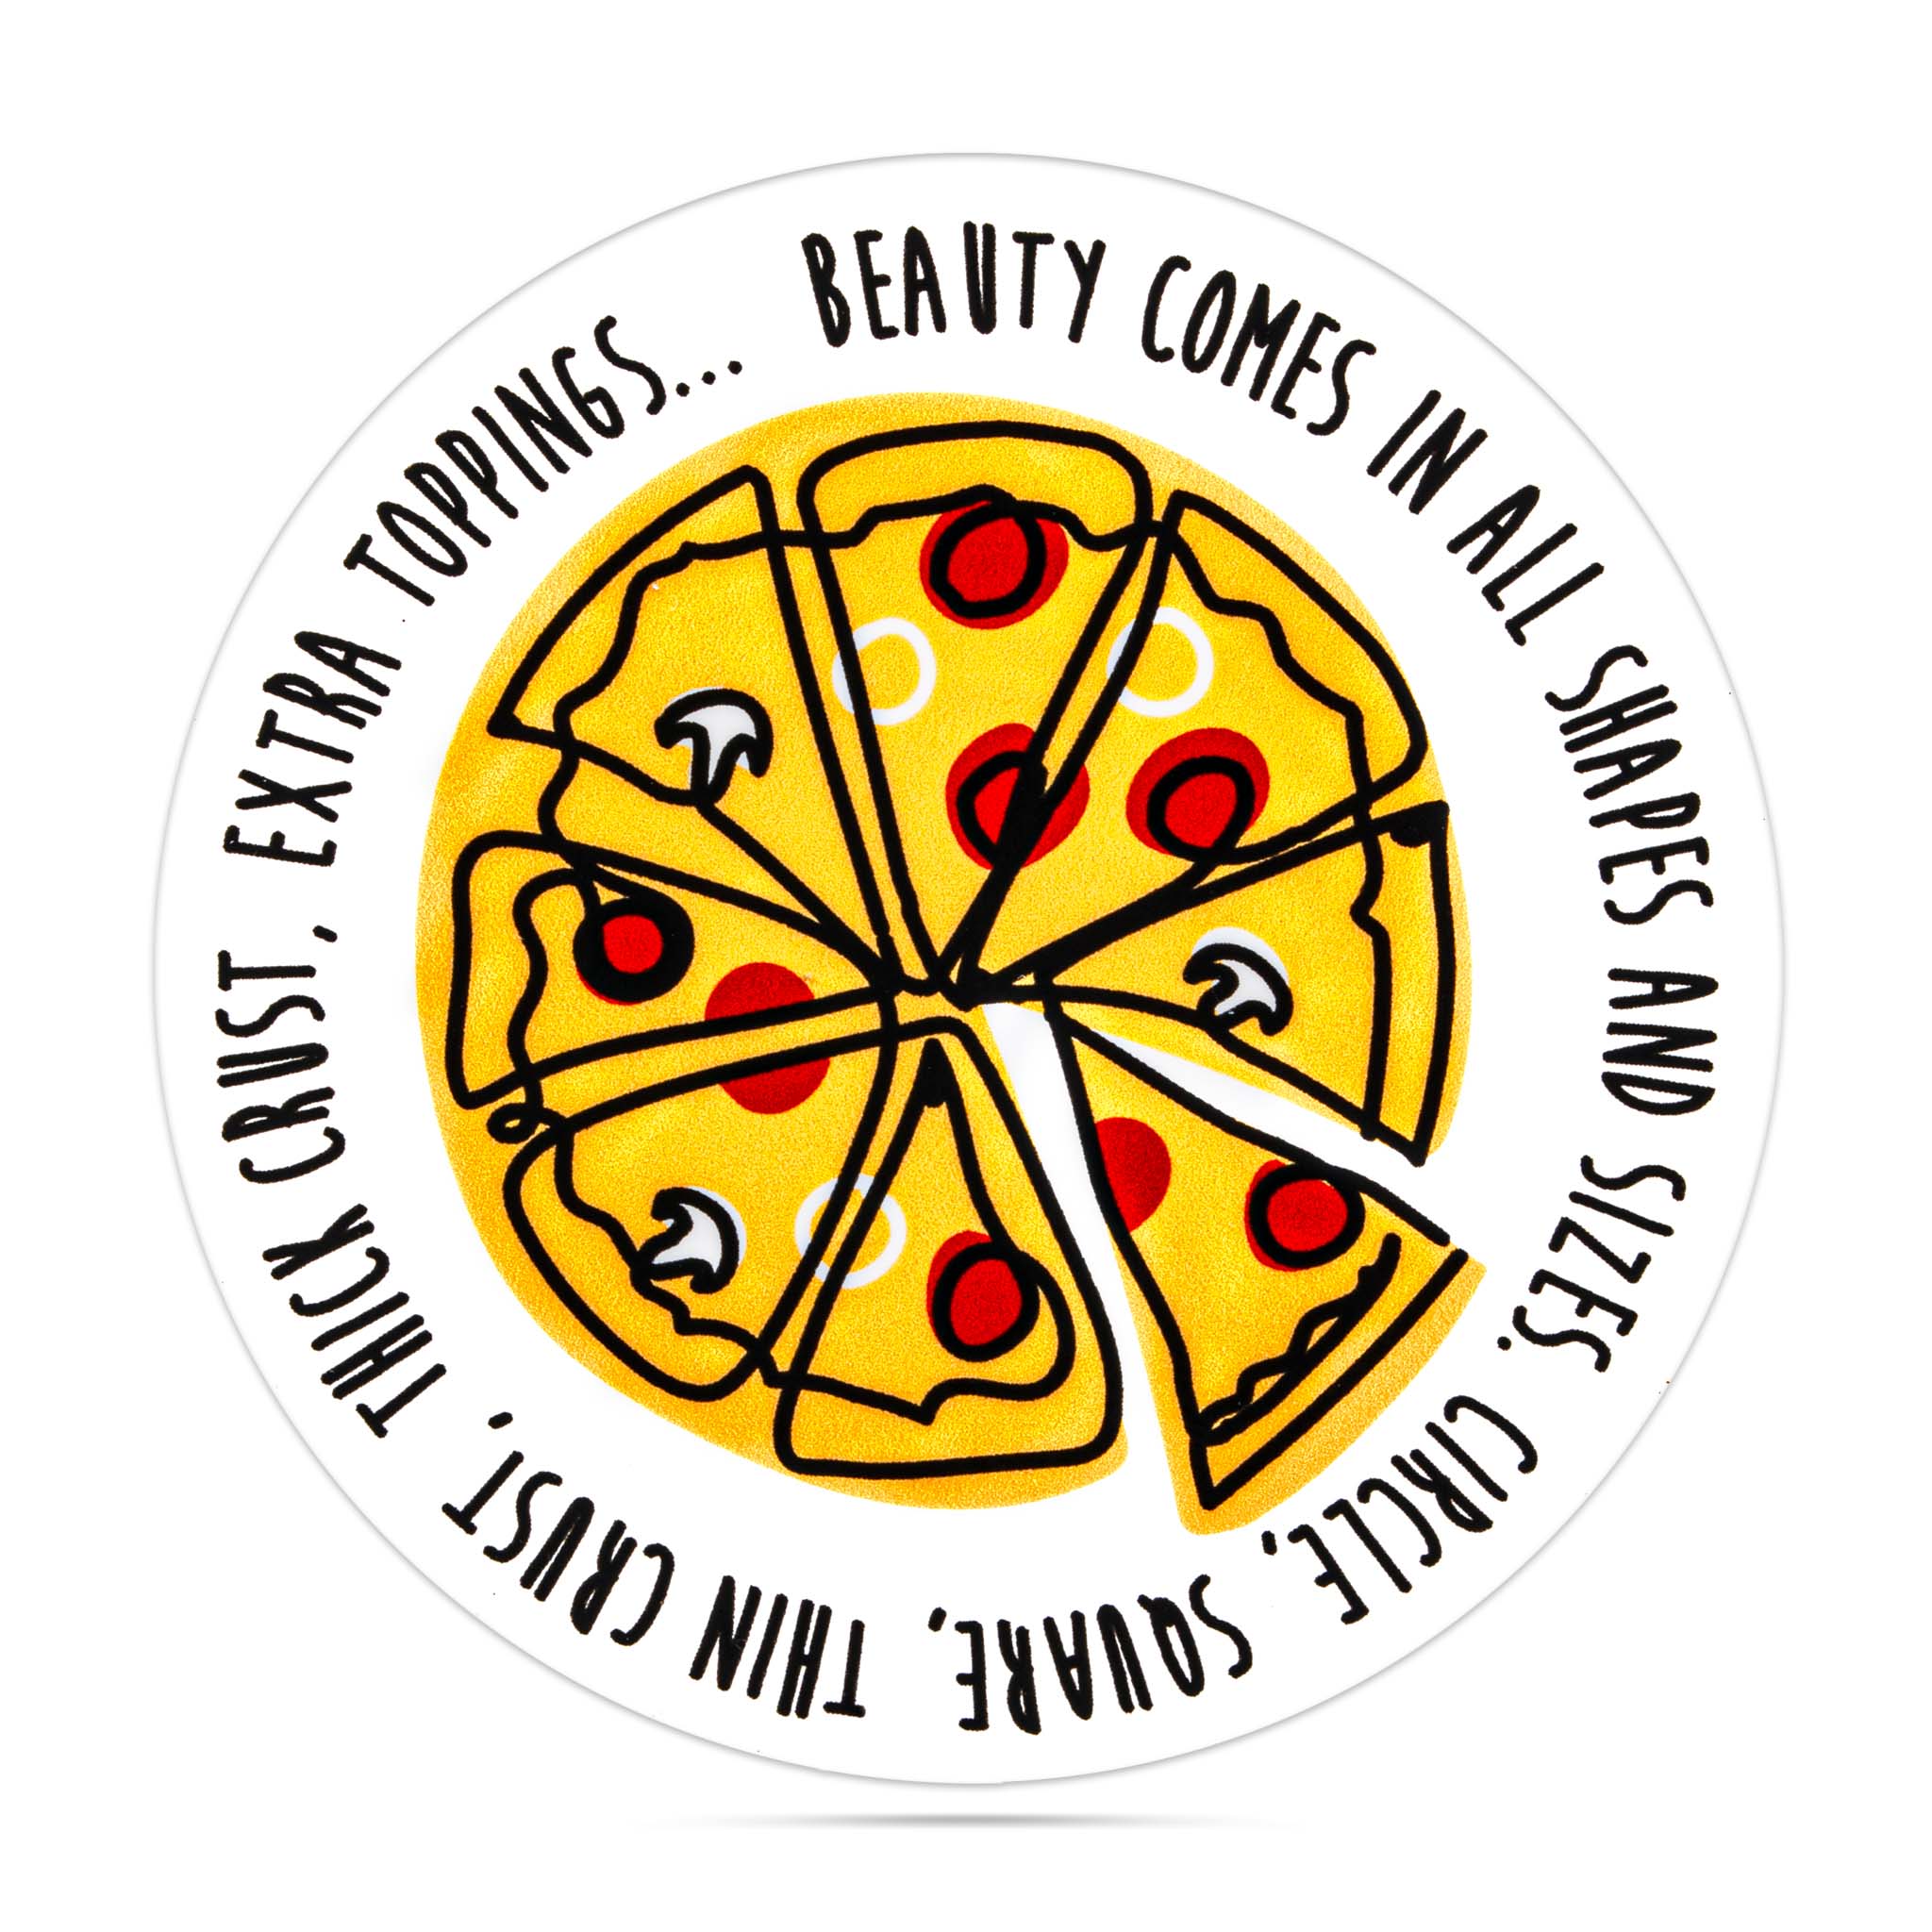 Beauty comes in all shapes and sizes. Circle, square, thin crust, thick crust, extra toppings.. vinyl stickers